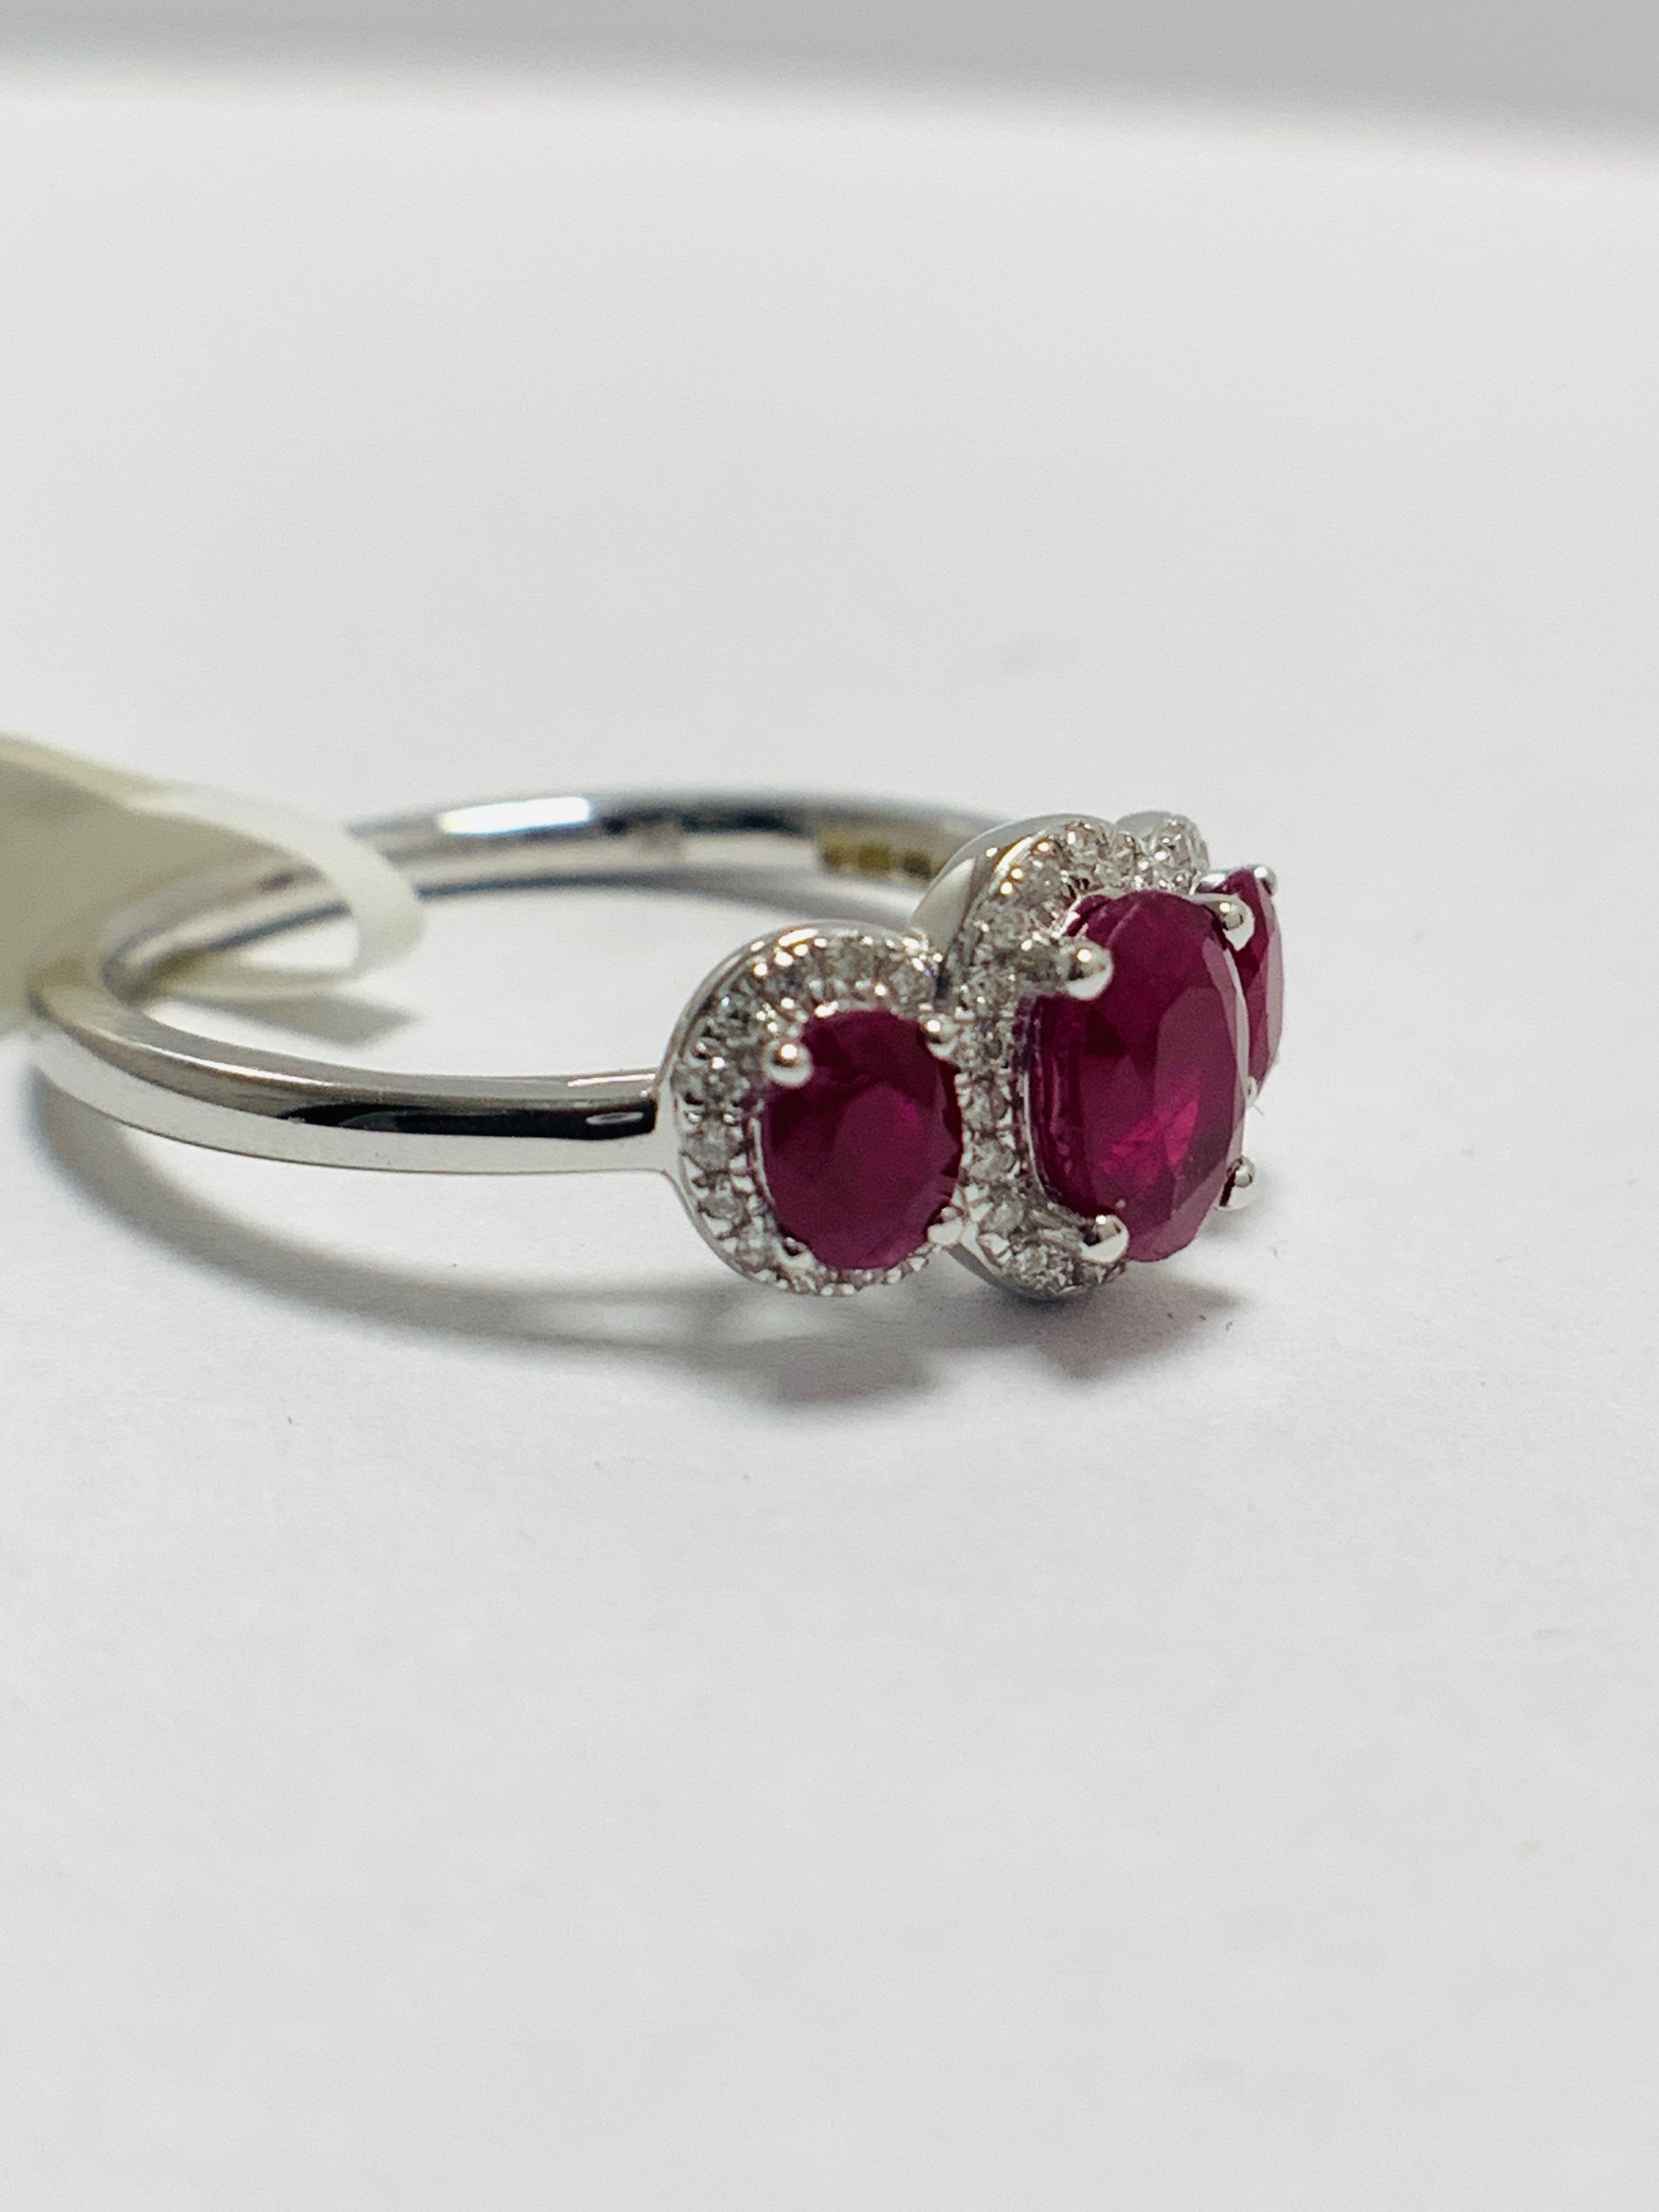 9ct white Gold Ruby trilogy style ring - Image 7 of 8